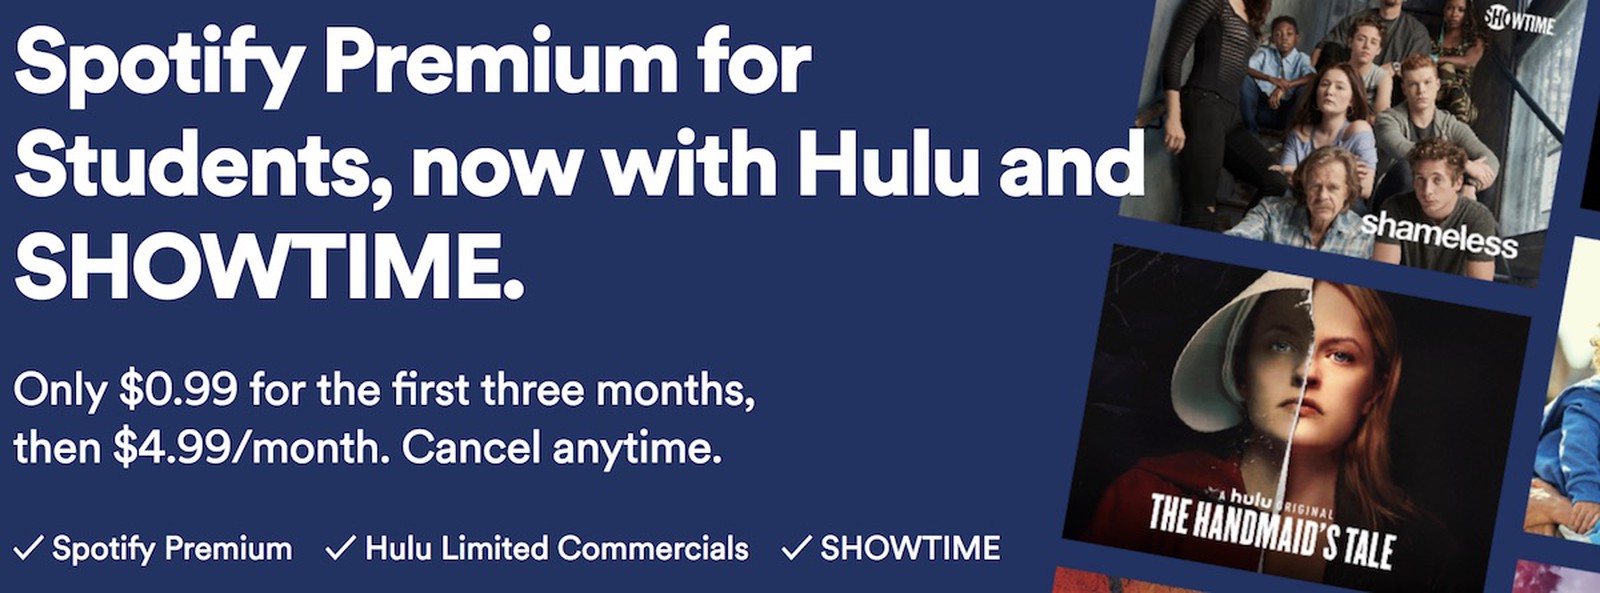 how to login to showtime with spotify